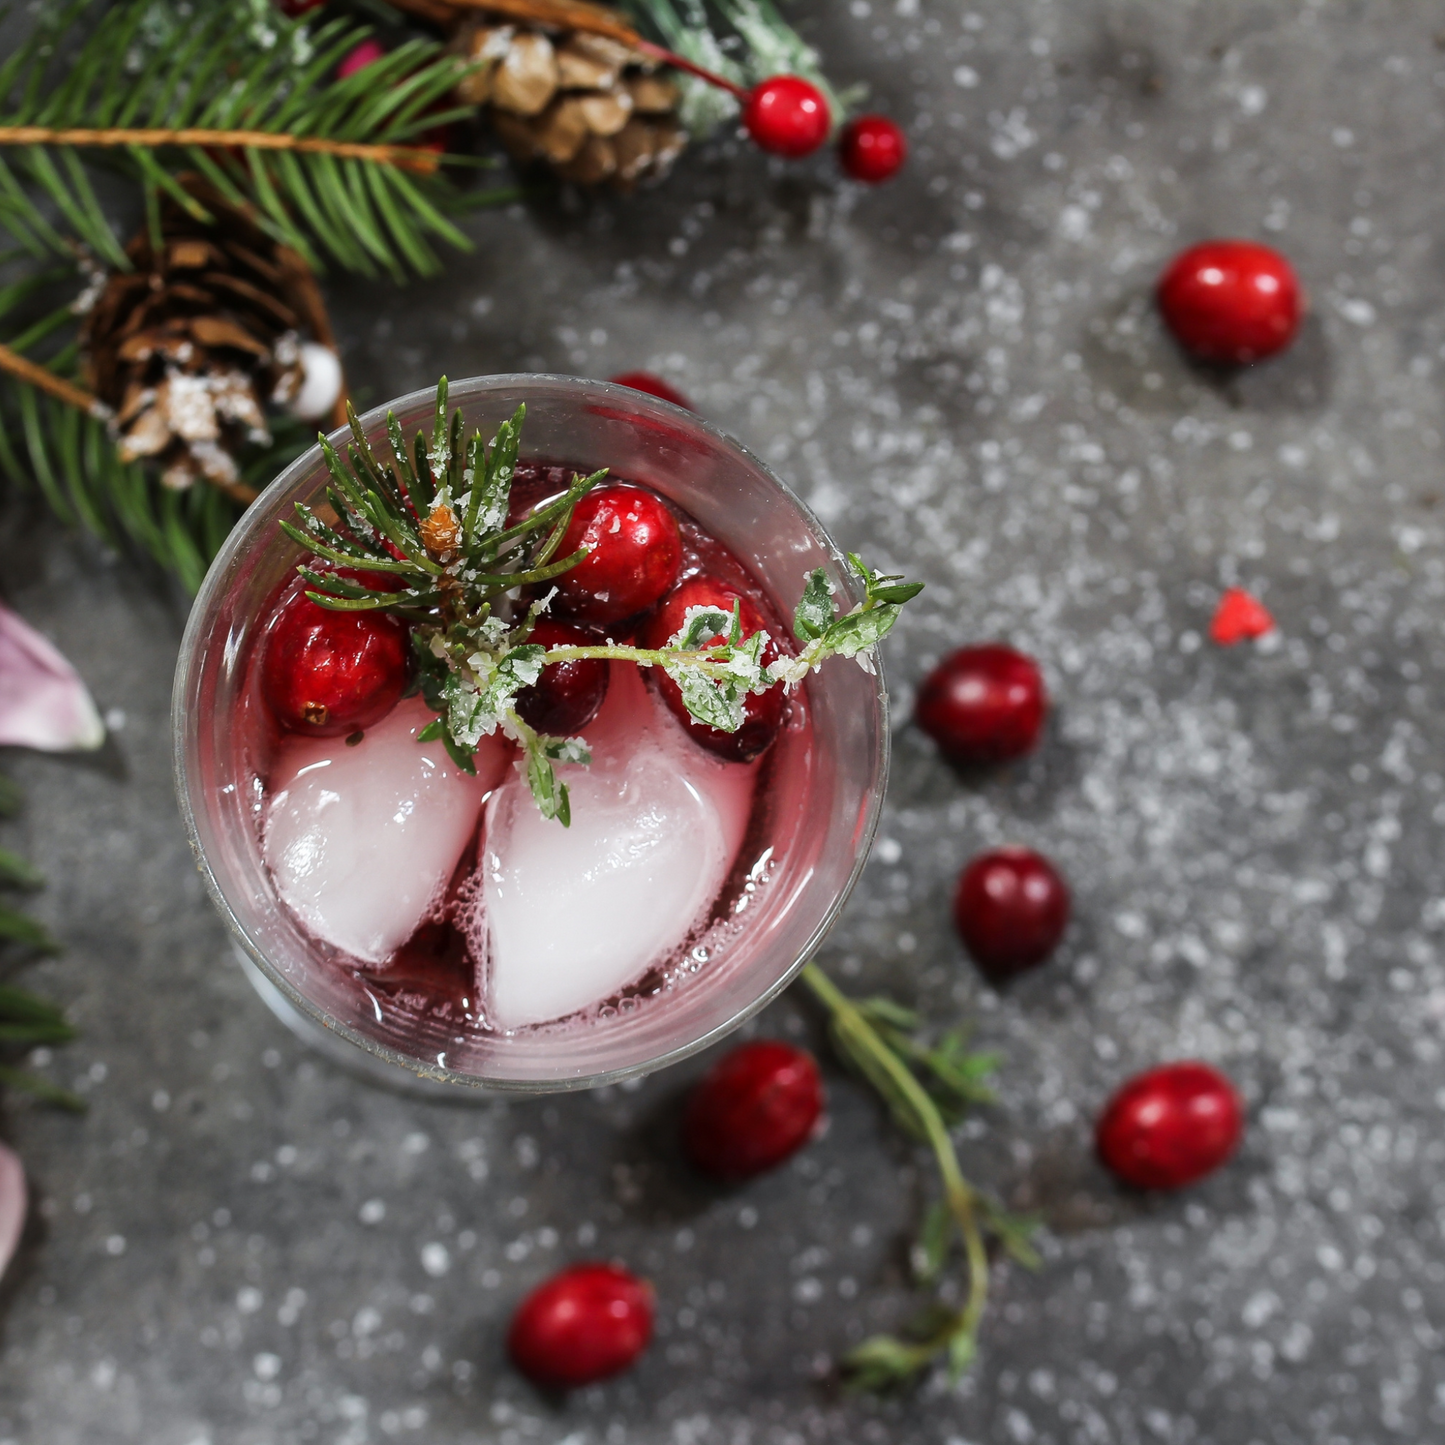 Hive Craft Cocktails Holiday Spirits - Festive Blend from Thanksgiving through New Year's Celebrations